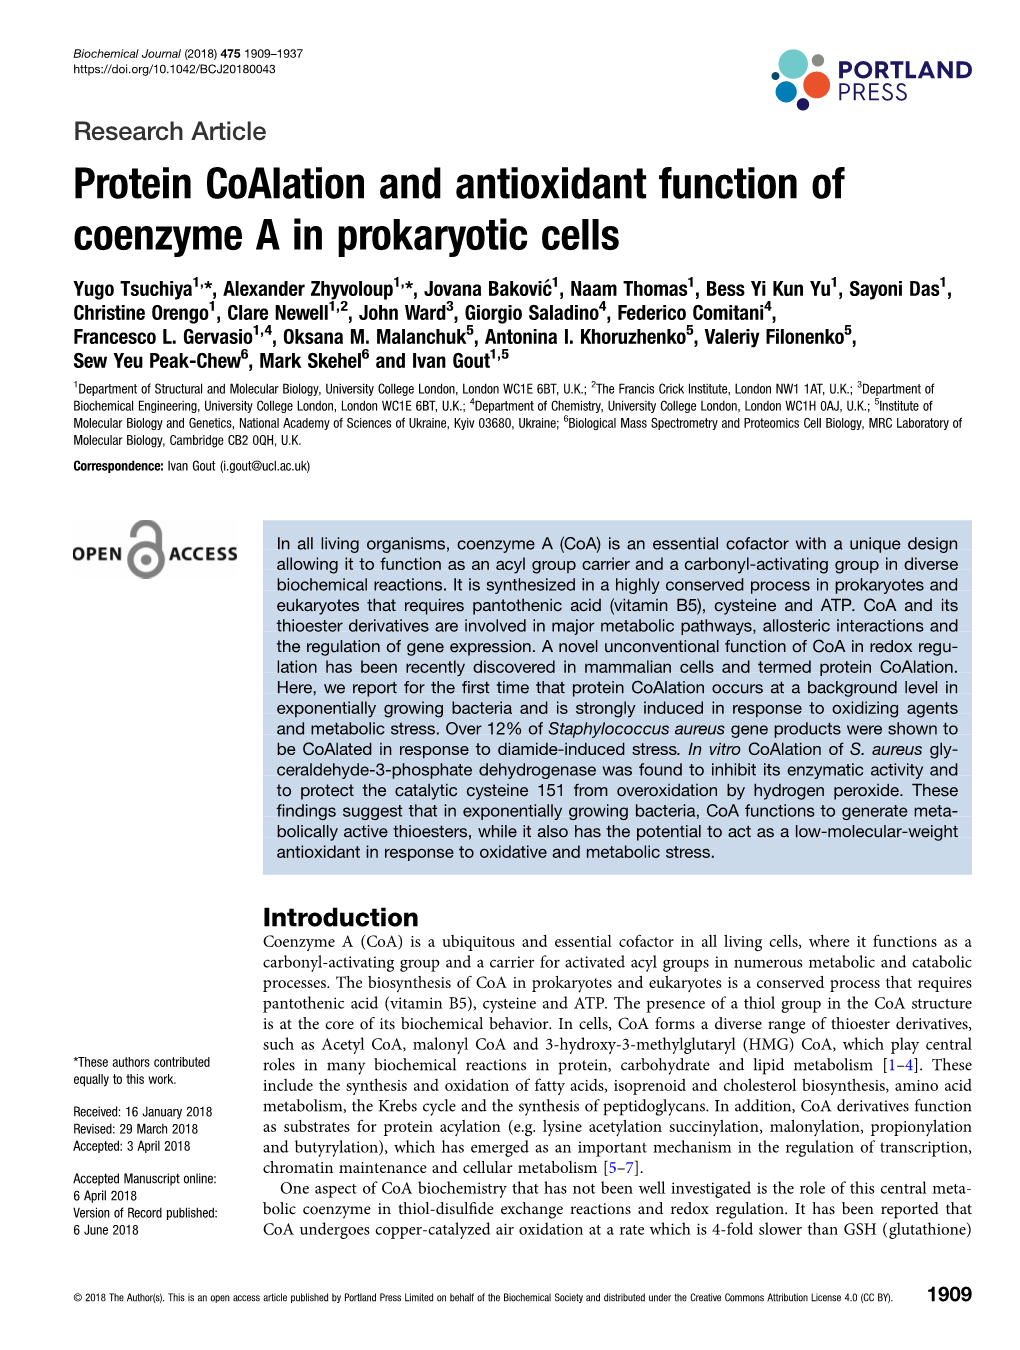 Protein Coalation and Antioxidant Function of Coenzyme a in Prokaryotic Cells